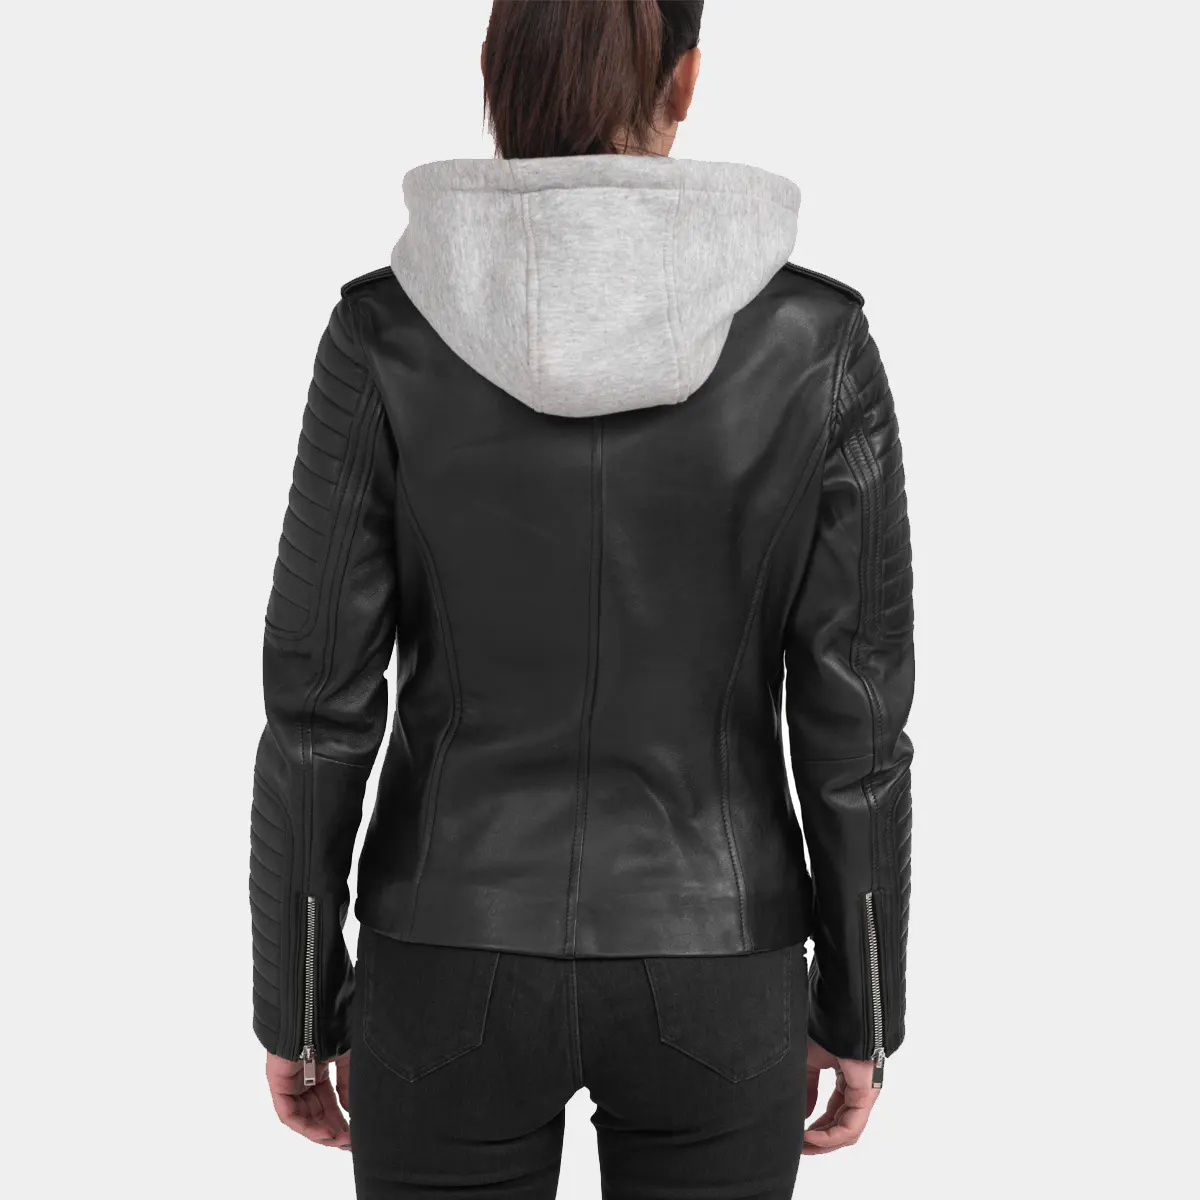 WOmen Black leather jacket with removeable hood